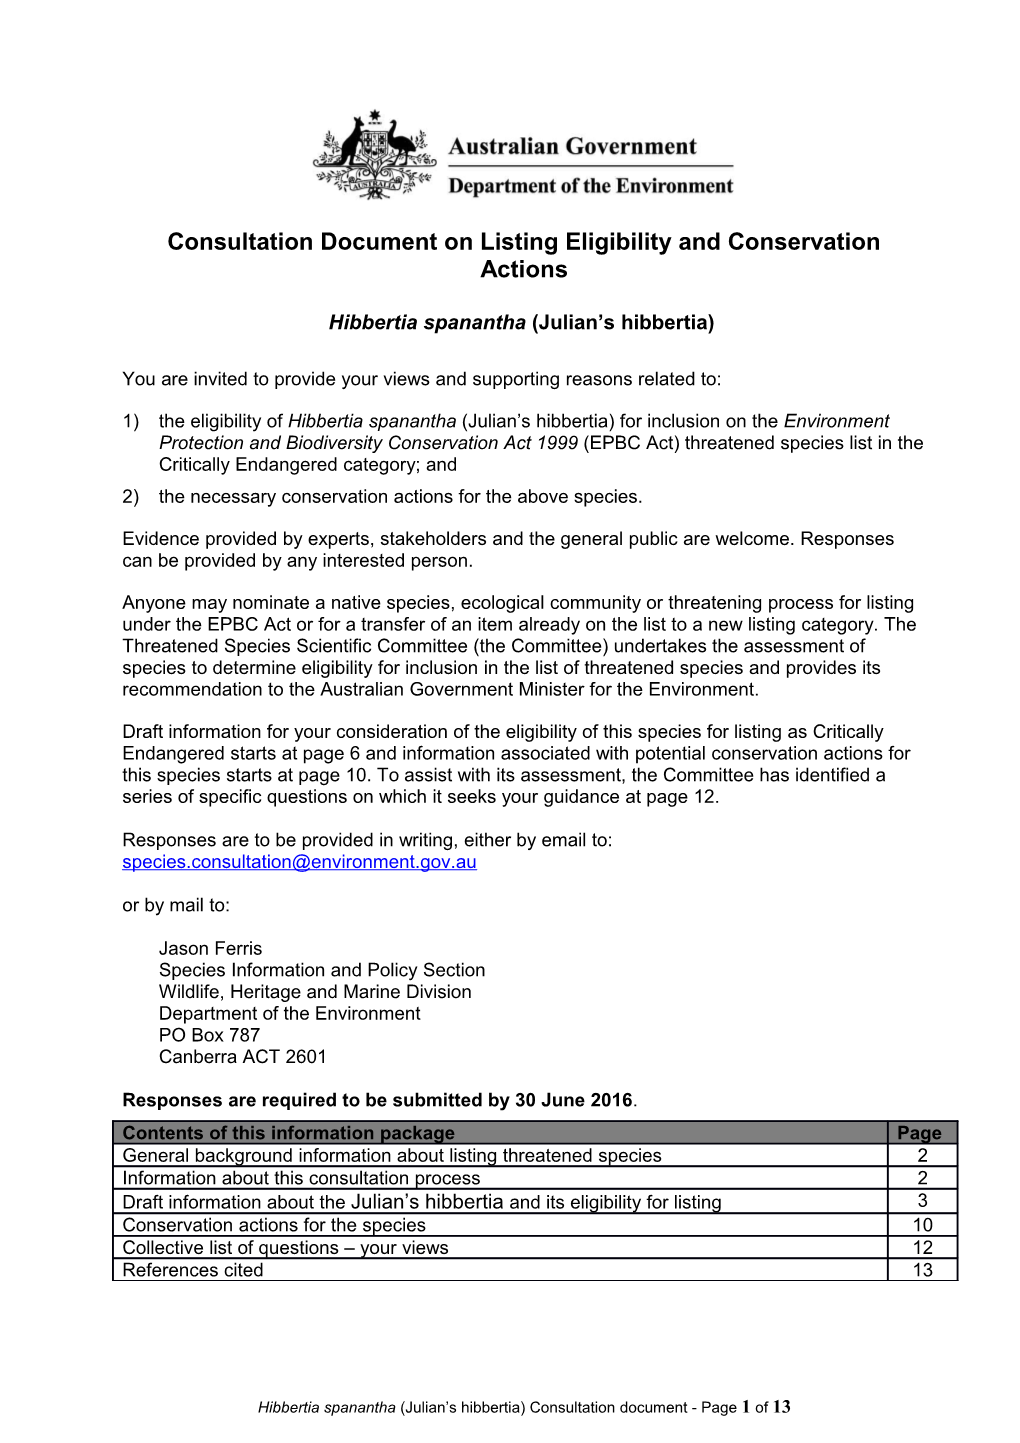 Consultation Document on Listing Eligibility and Conservation Actions Hibbertia Spanantha